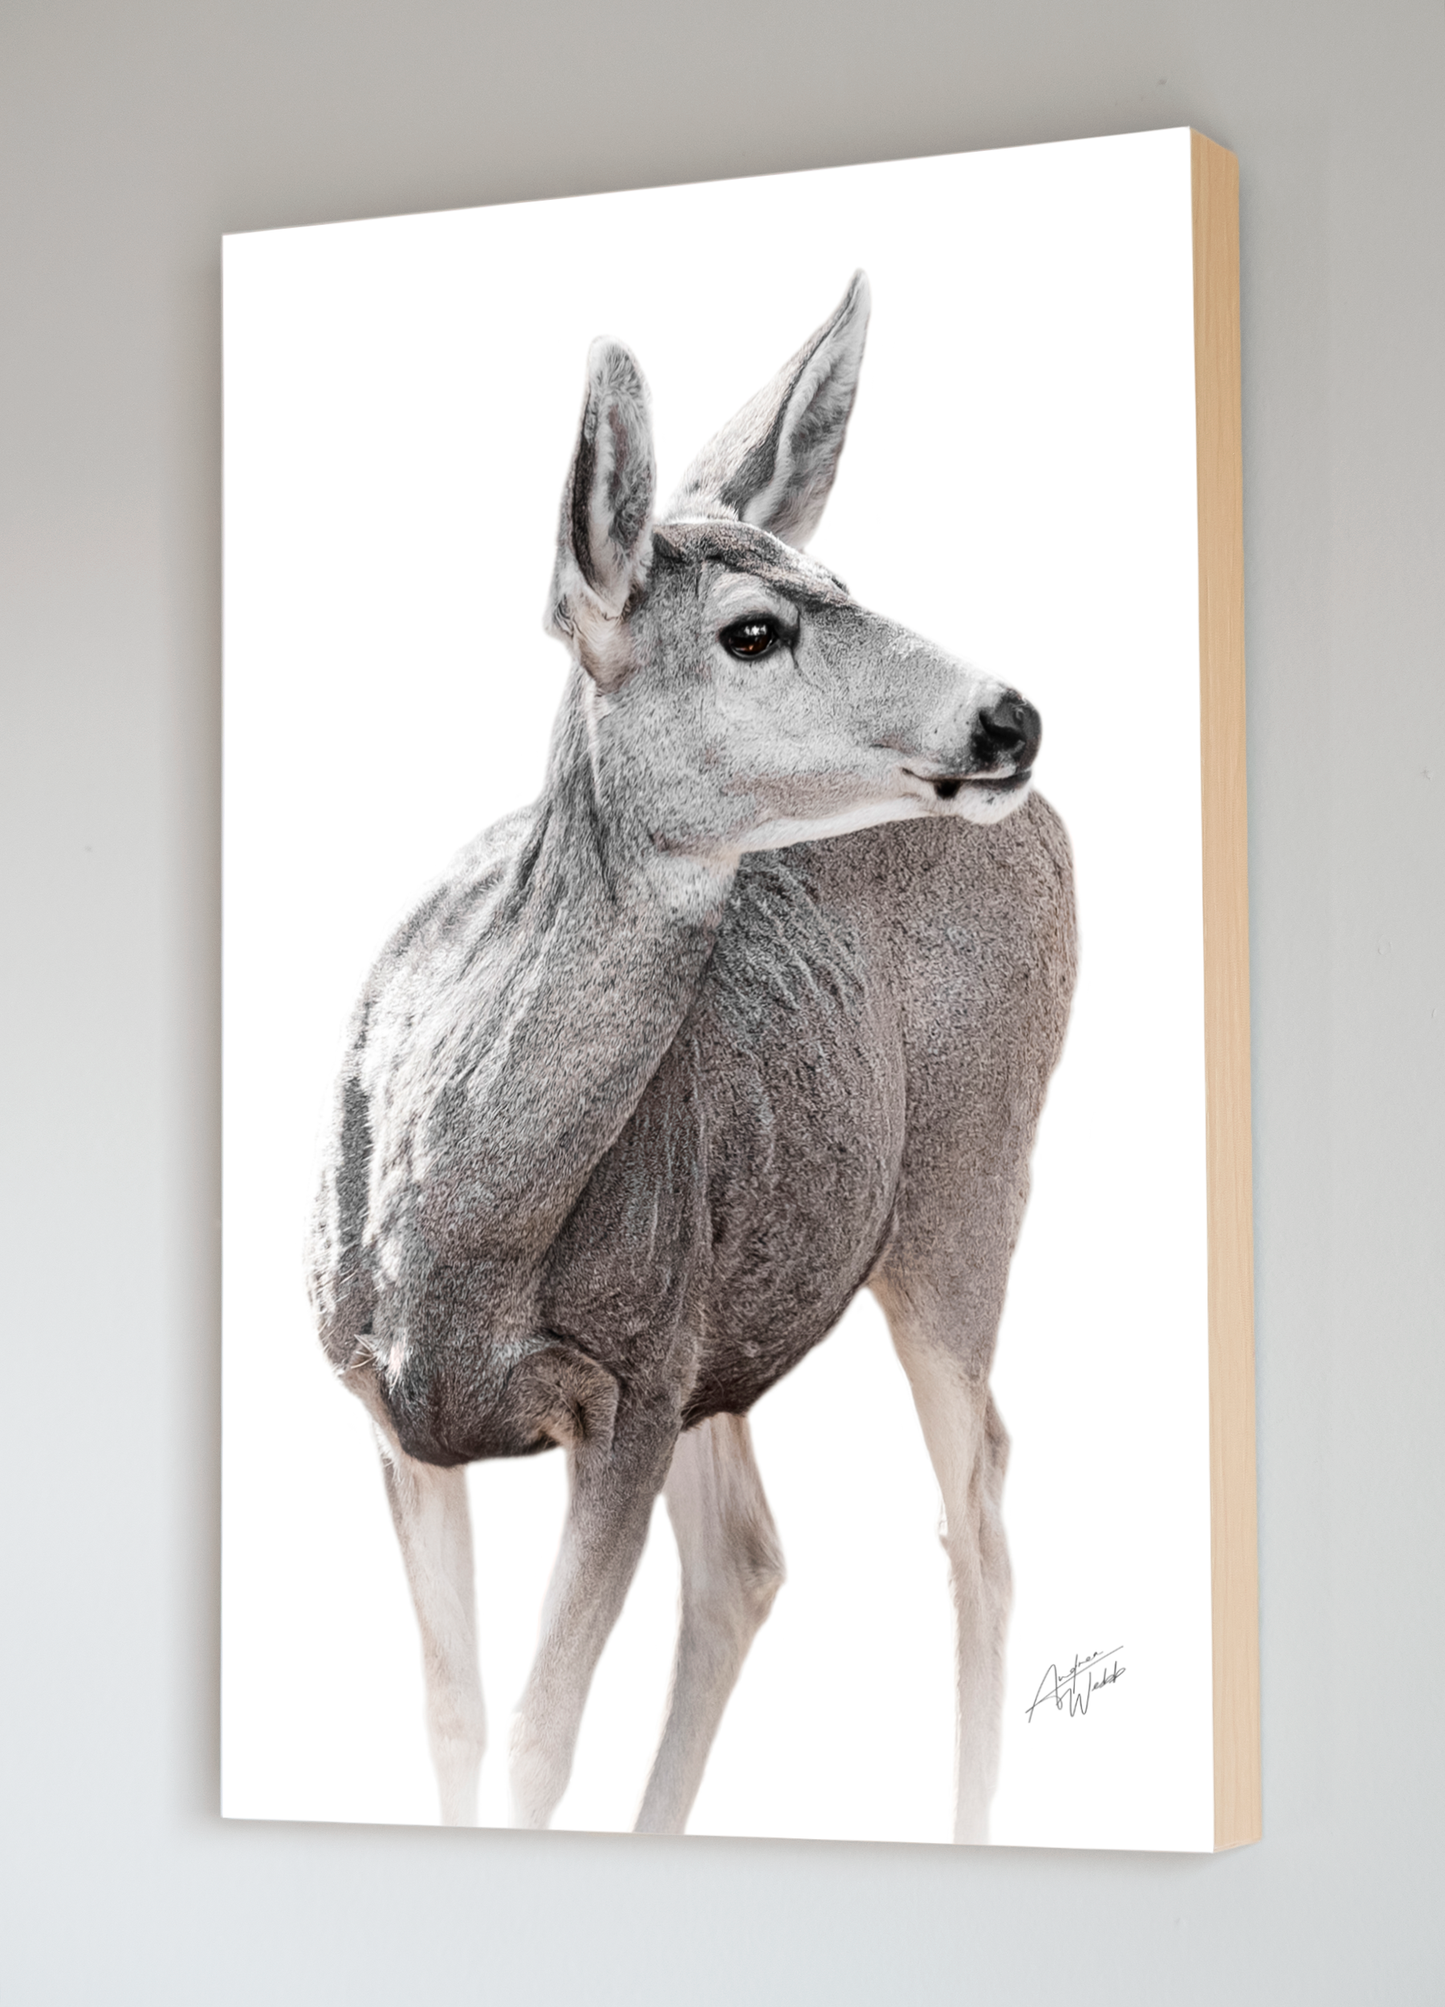 A beautiful mule deer doe featured on a white background. This Mule Deer doe portrait is available as a print, mounted print, standout print, and canvas. Mule deer photography. Mule deer art. Mule deer artwork. Mule deer prints. Mule deer canvases. Mule deer wall art. Mule deer gifts.